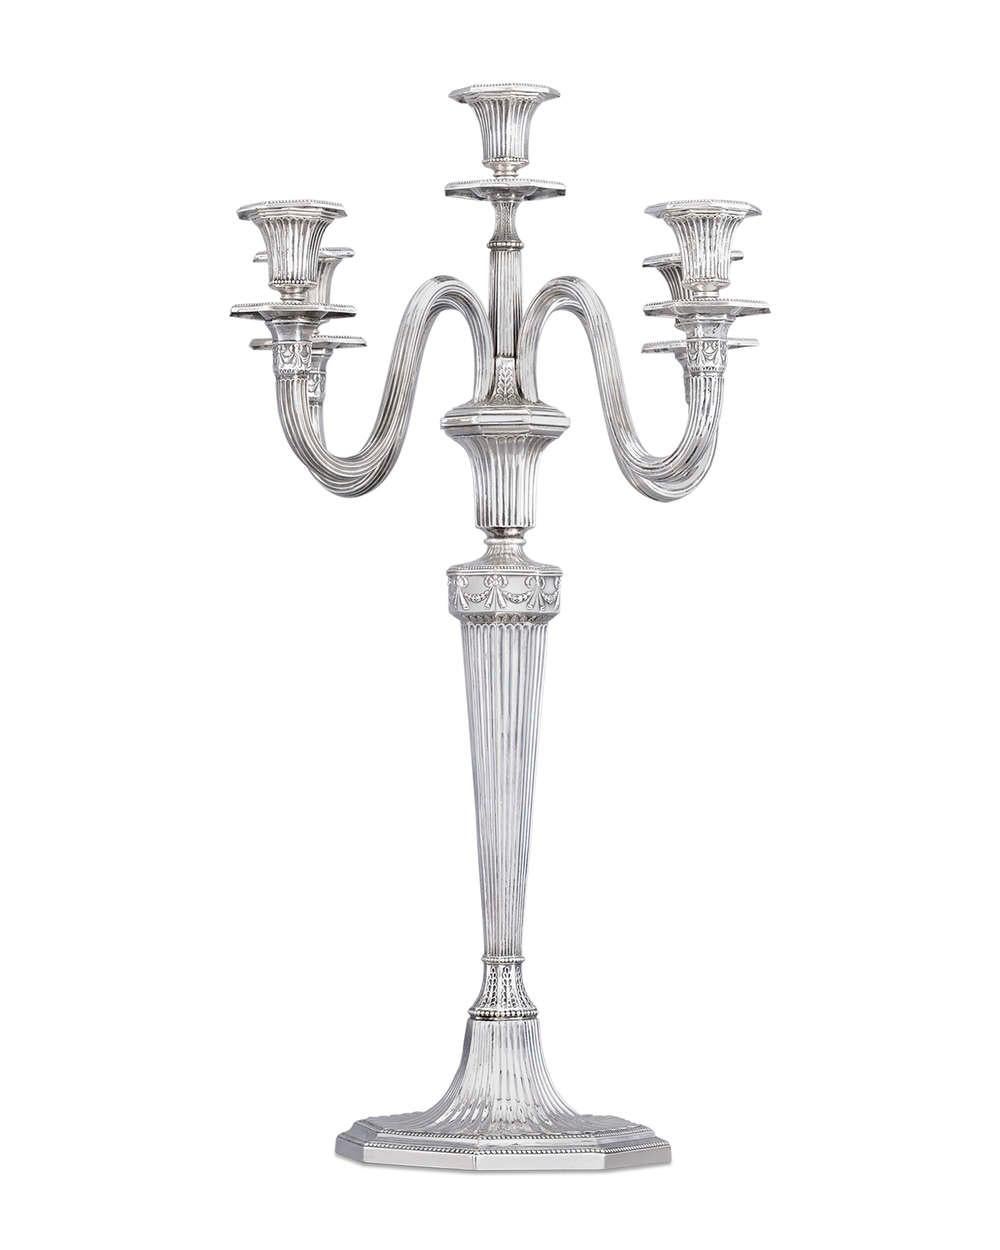 One of the oldest and most esteemed silver firms in Germany, Bruckmann & Söhne, created this wonderful pair of antique silver five-light candelabra. The Neoclassical forms are distinguished by elegant repoussé fluting punctuated by diminutive